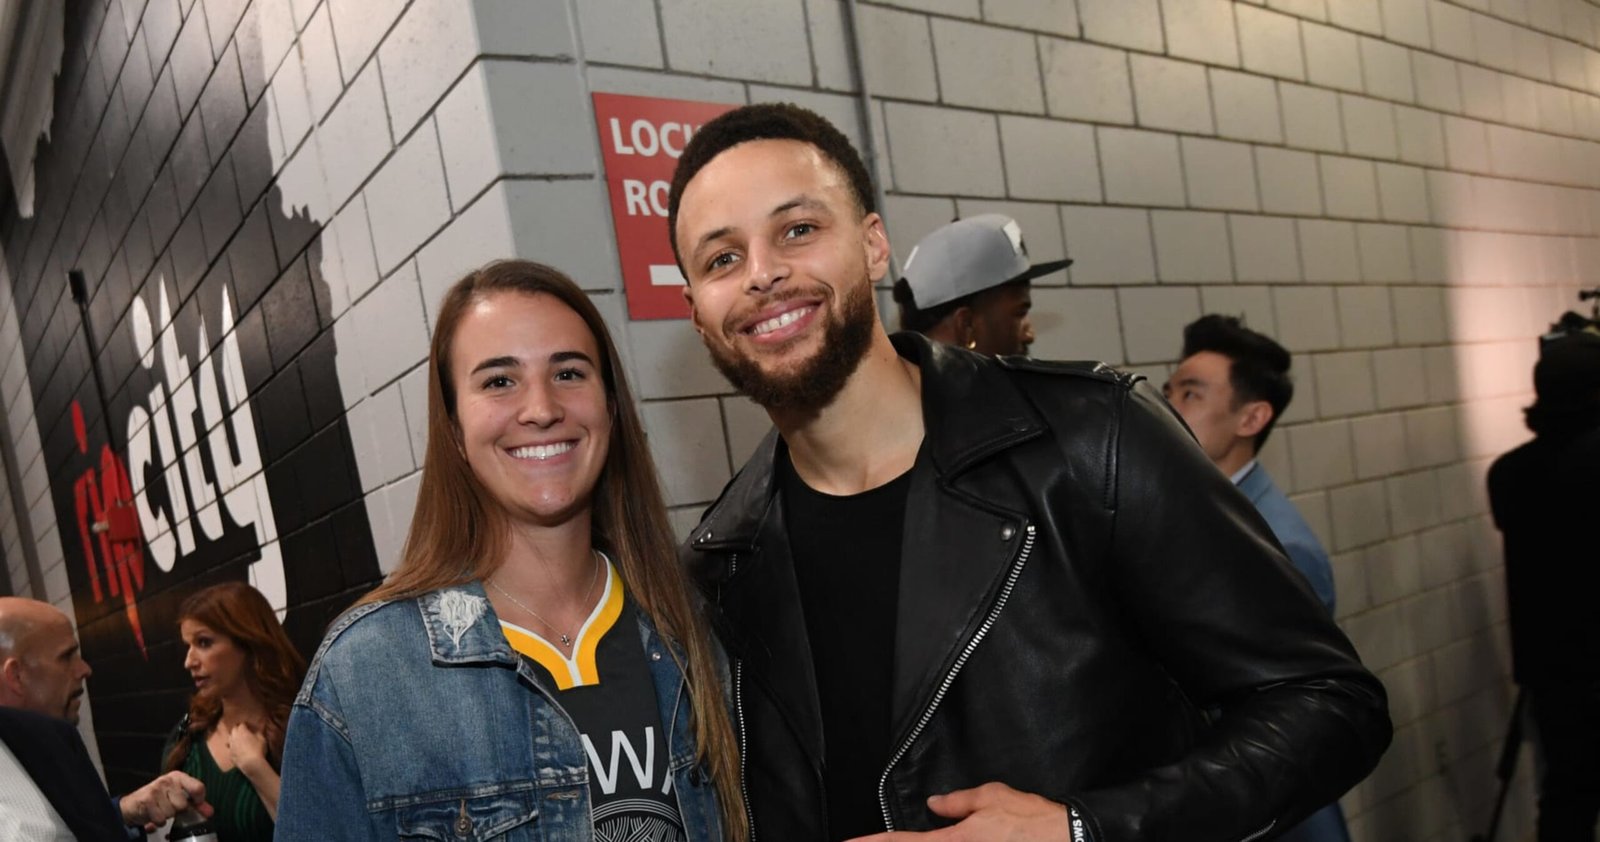 Stephen Curry on Sabrina Ionsecu’s 3-Point Contest File: ‘We Gotta Settle That One’